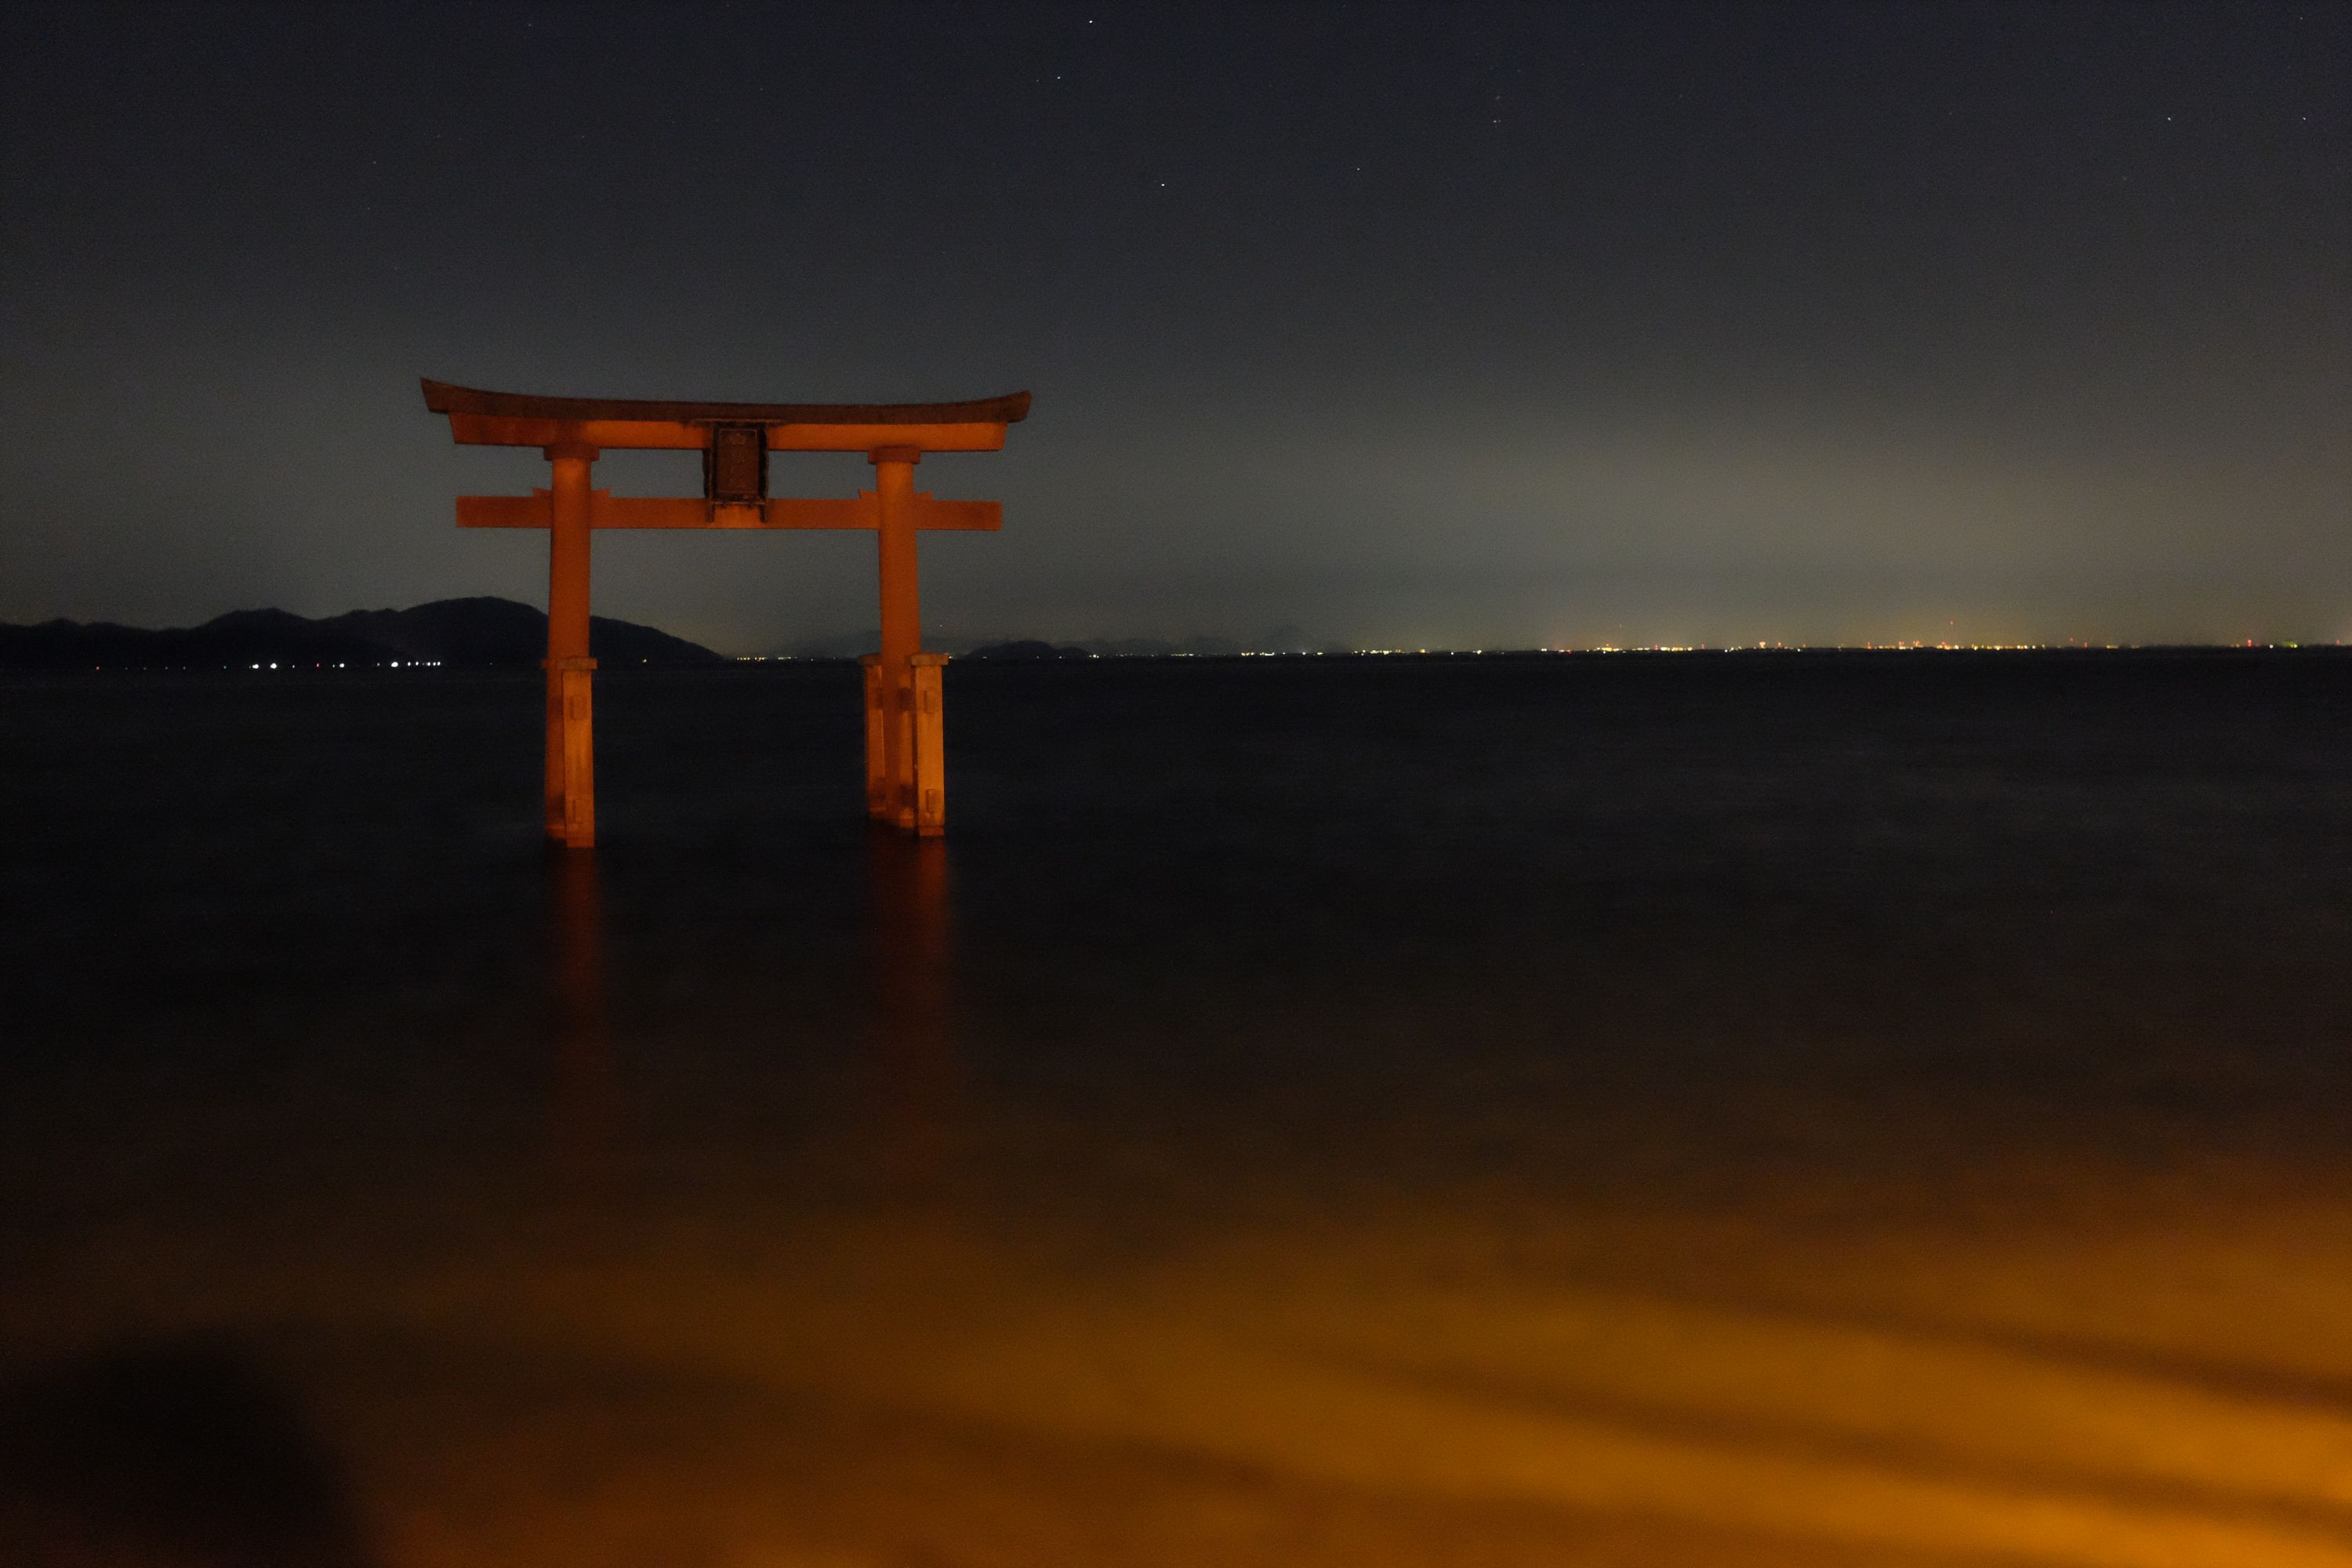 The red torii gate of a Japanese shrine stands in the waters of a lake at night.